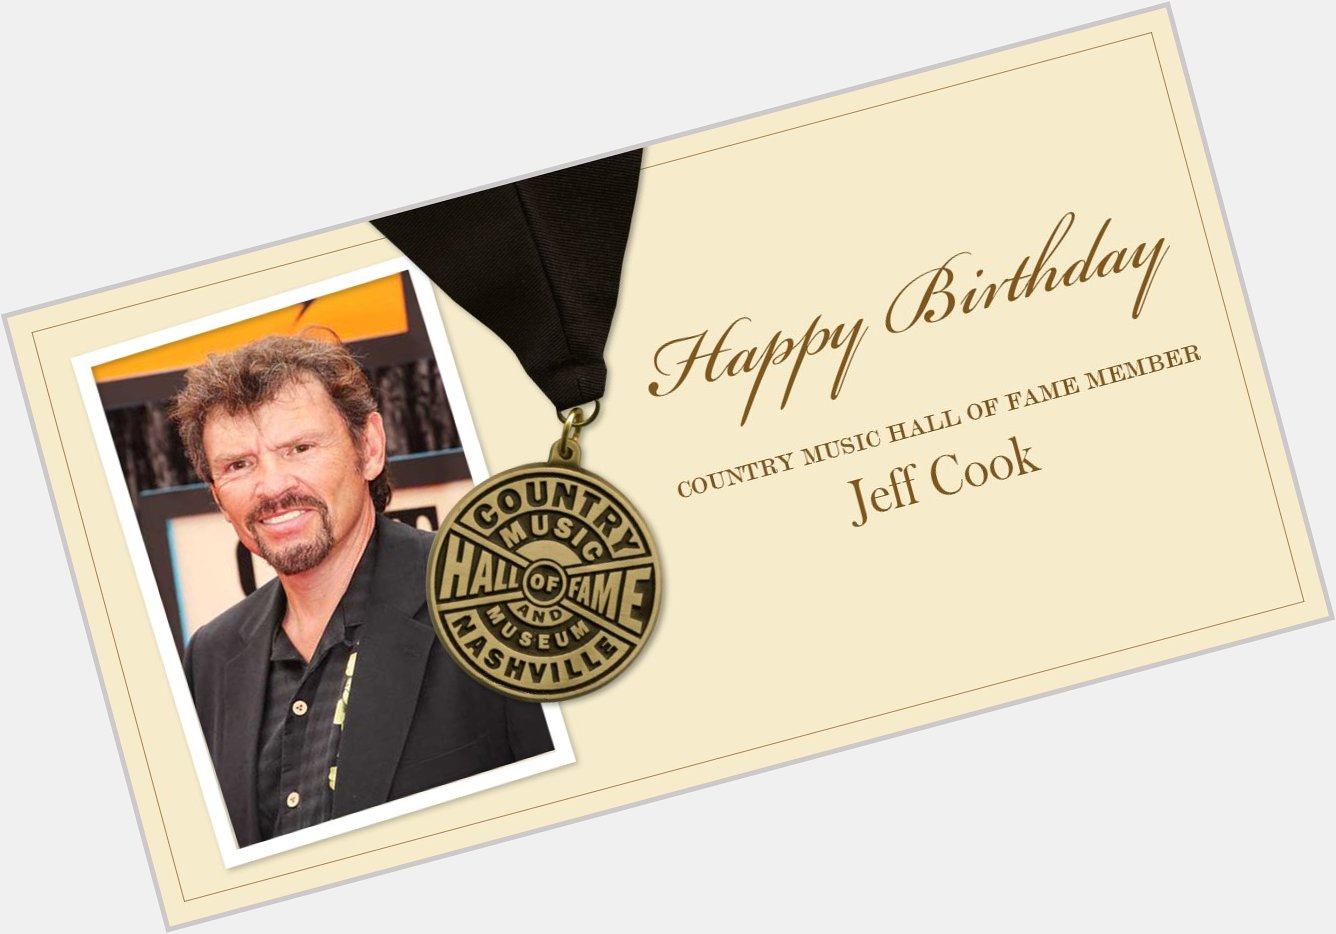 Happy Birthday to Country Music Hall of Fame member Jeff Cook of We hope it\s a great day, Jeff! 